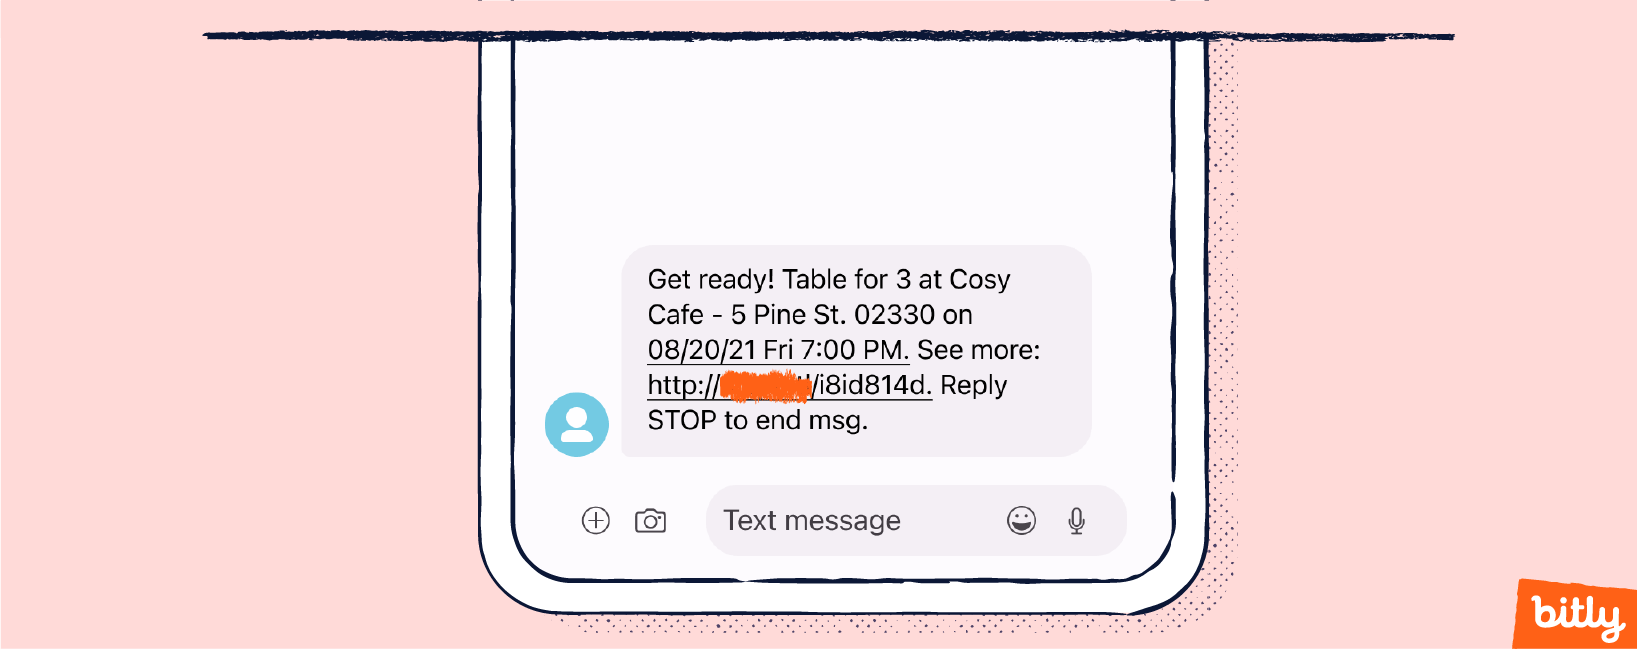 An SMS on a smartphone confirming a reservation at a restaurant.